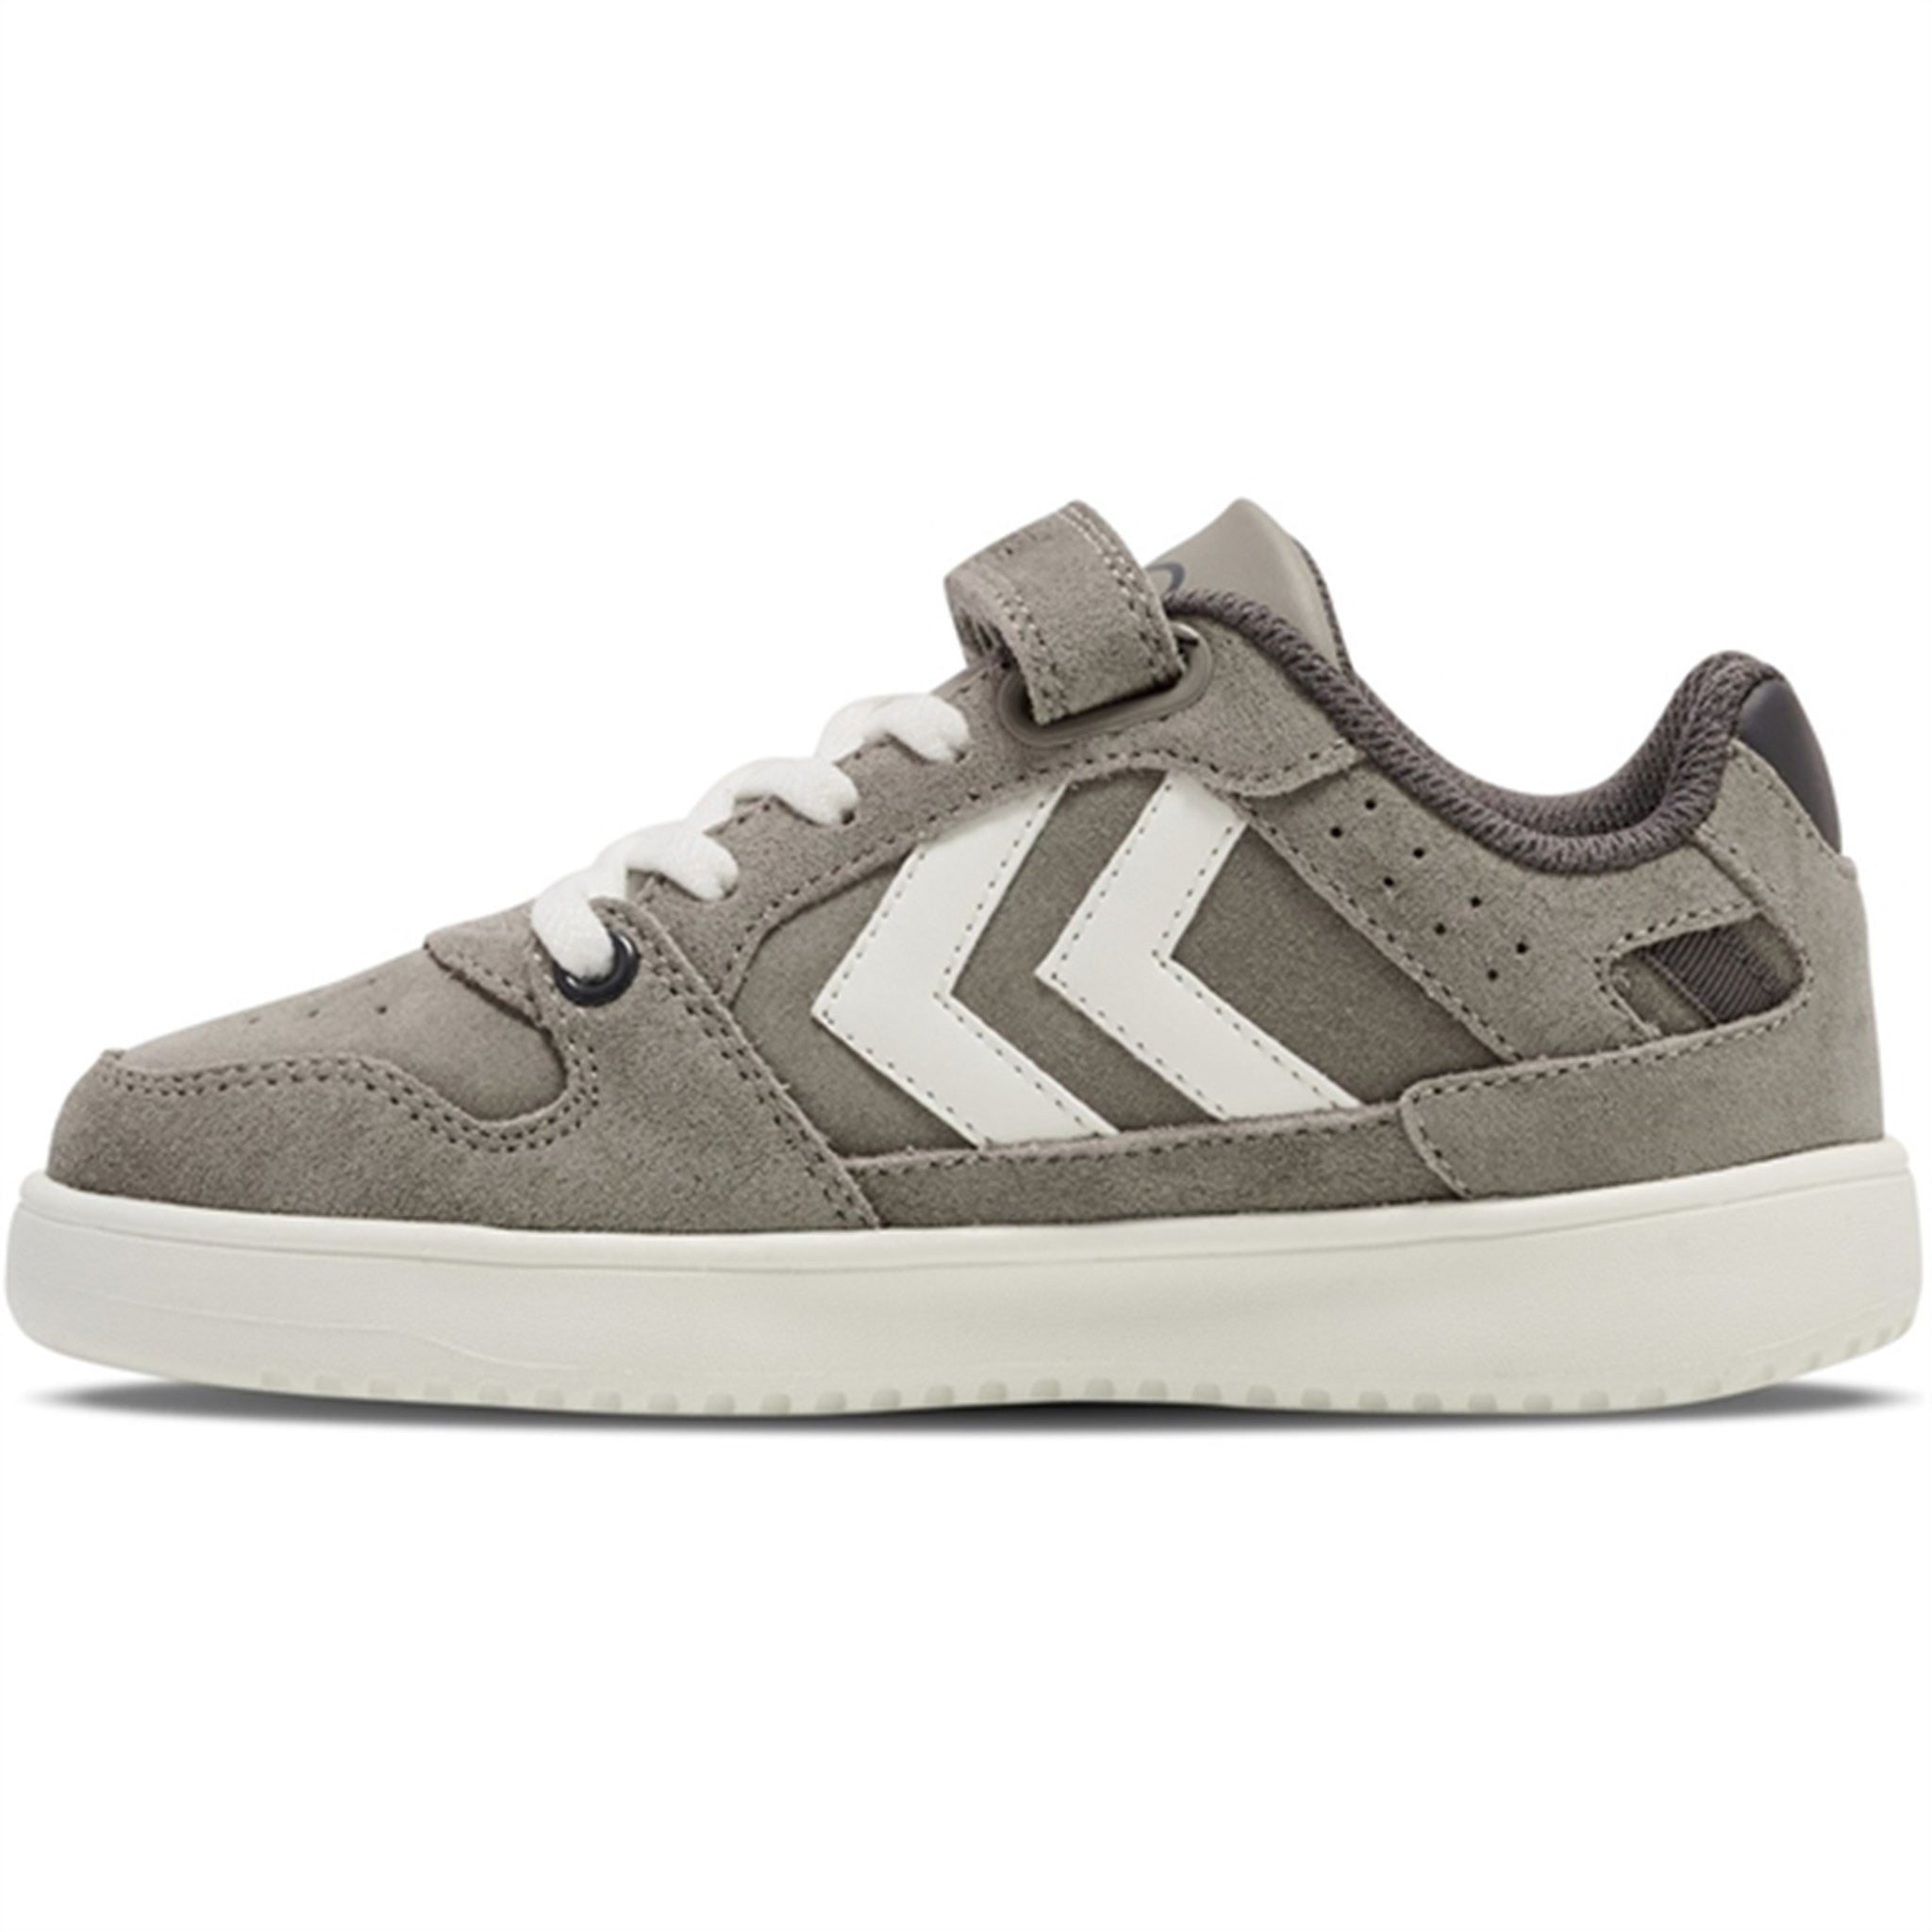 Hummel St. Power Play Suede Jr Sneakers Roasted Cashew